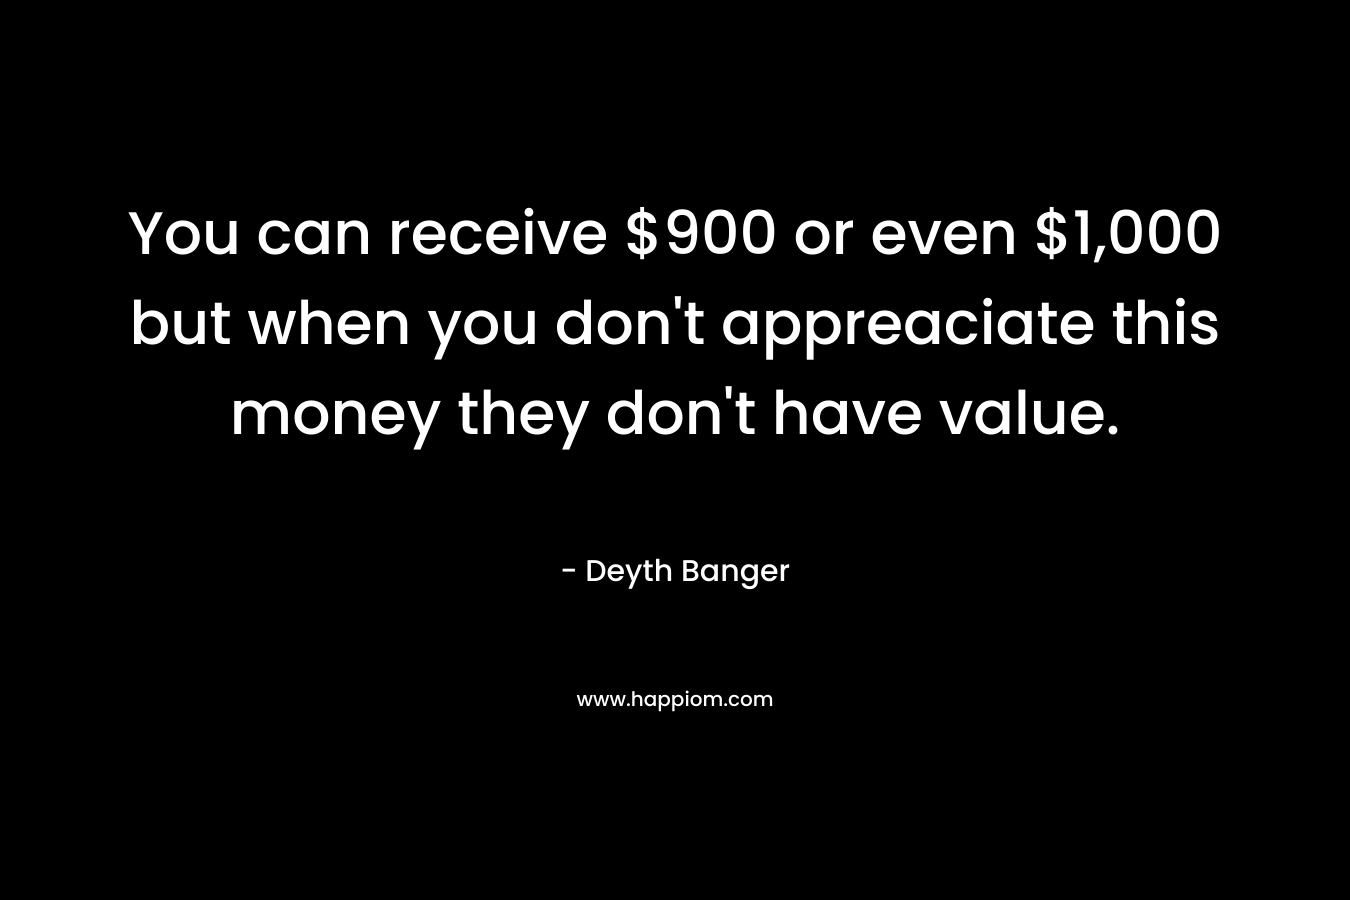 You can receive $900 or even $1,000 but when you don’t appreaciate this money they don’t have value. – Deyth Banger